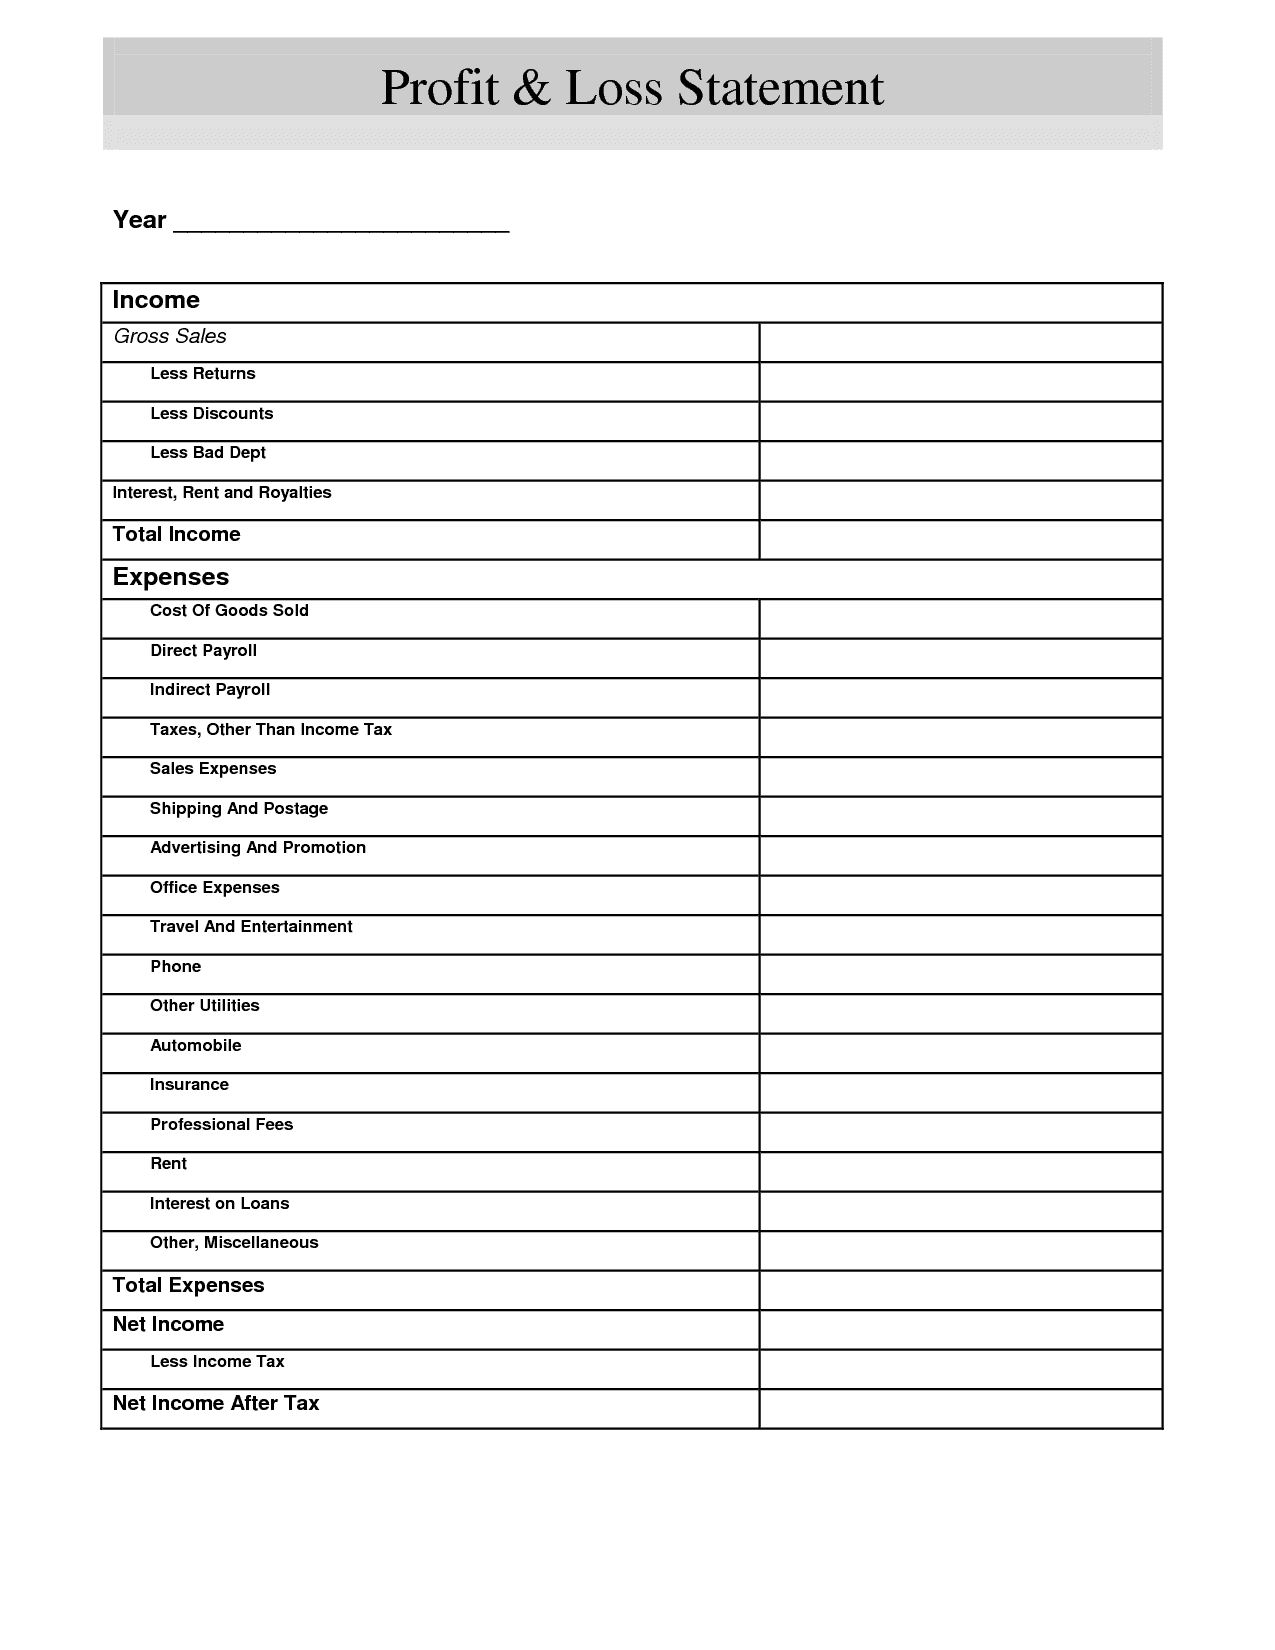 Profit And Loss Statement Format Free Download And Profit And Loss Worksheet